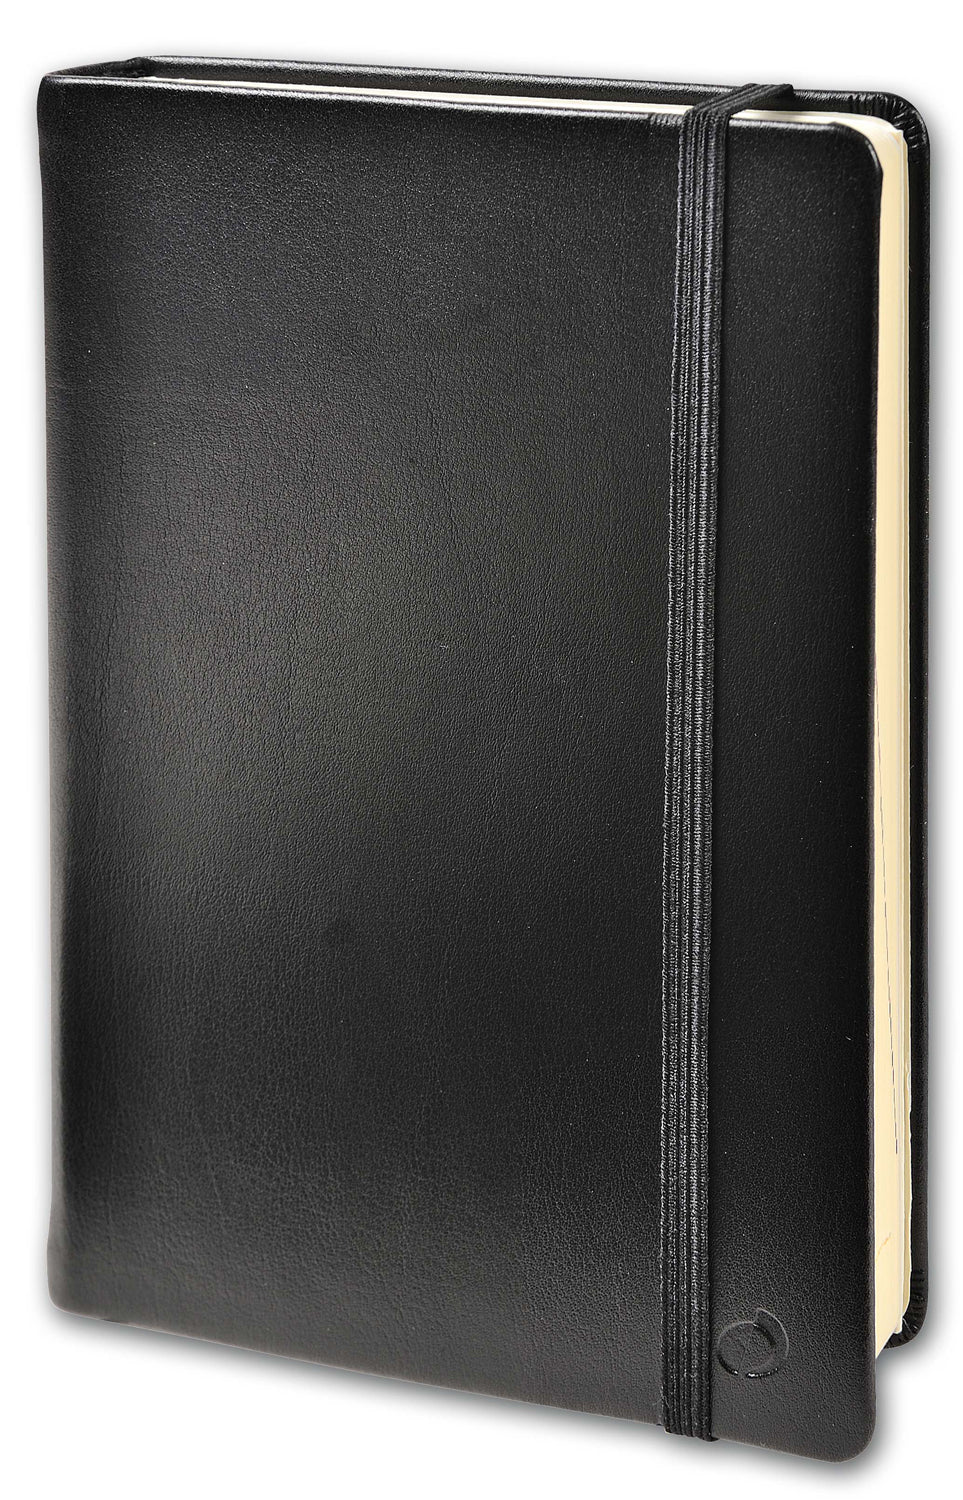 Quo Vadis Habana Black Lined Ruled Notebook with Ivory Pages - A5+ - 240 mm x 160 mm